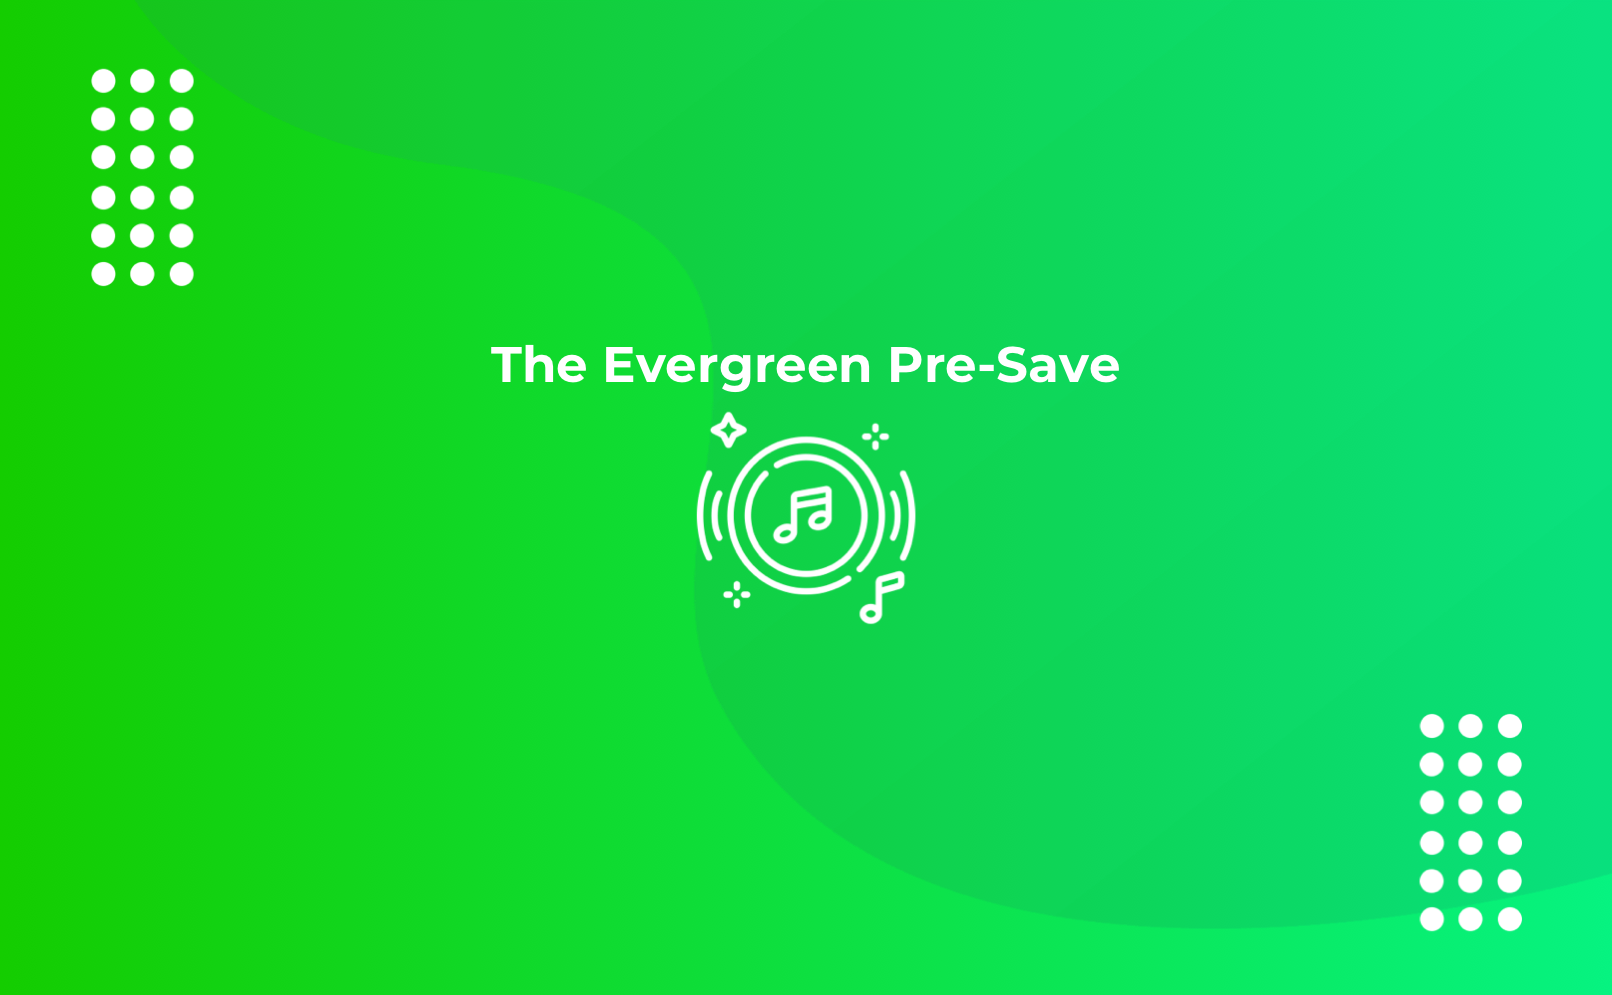 Get Pre-Saves without even knowing when your next release is